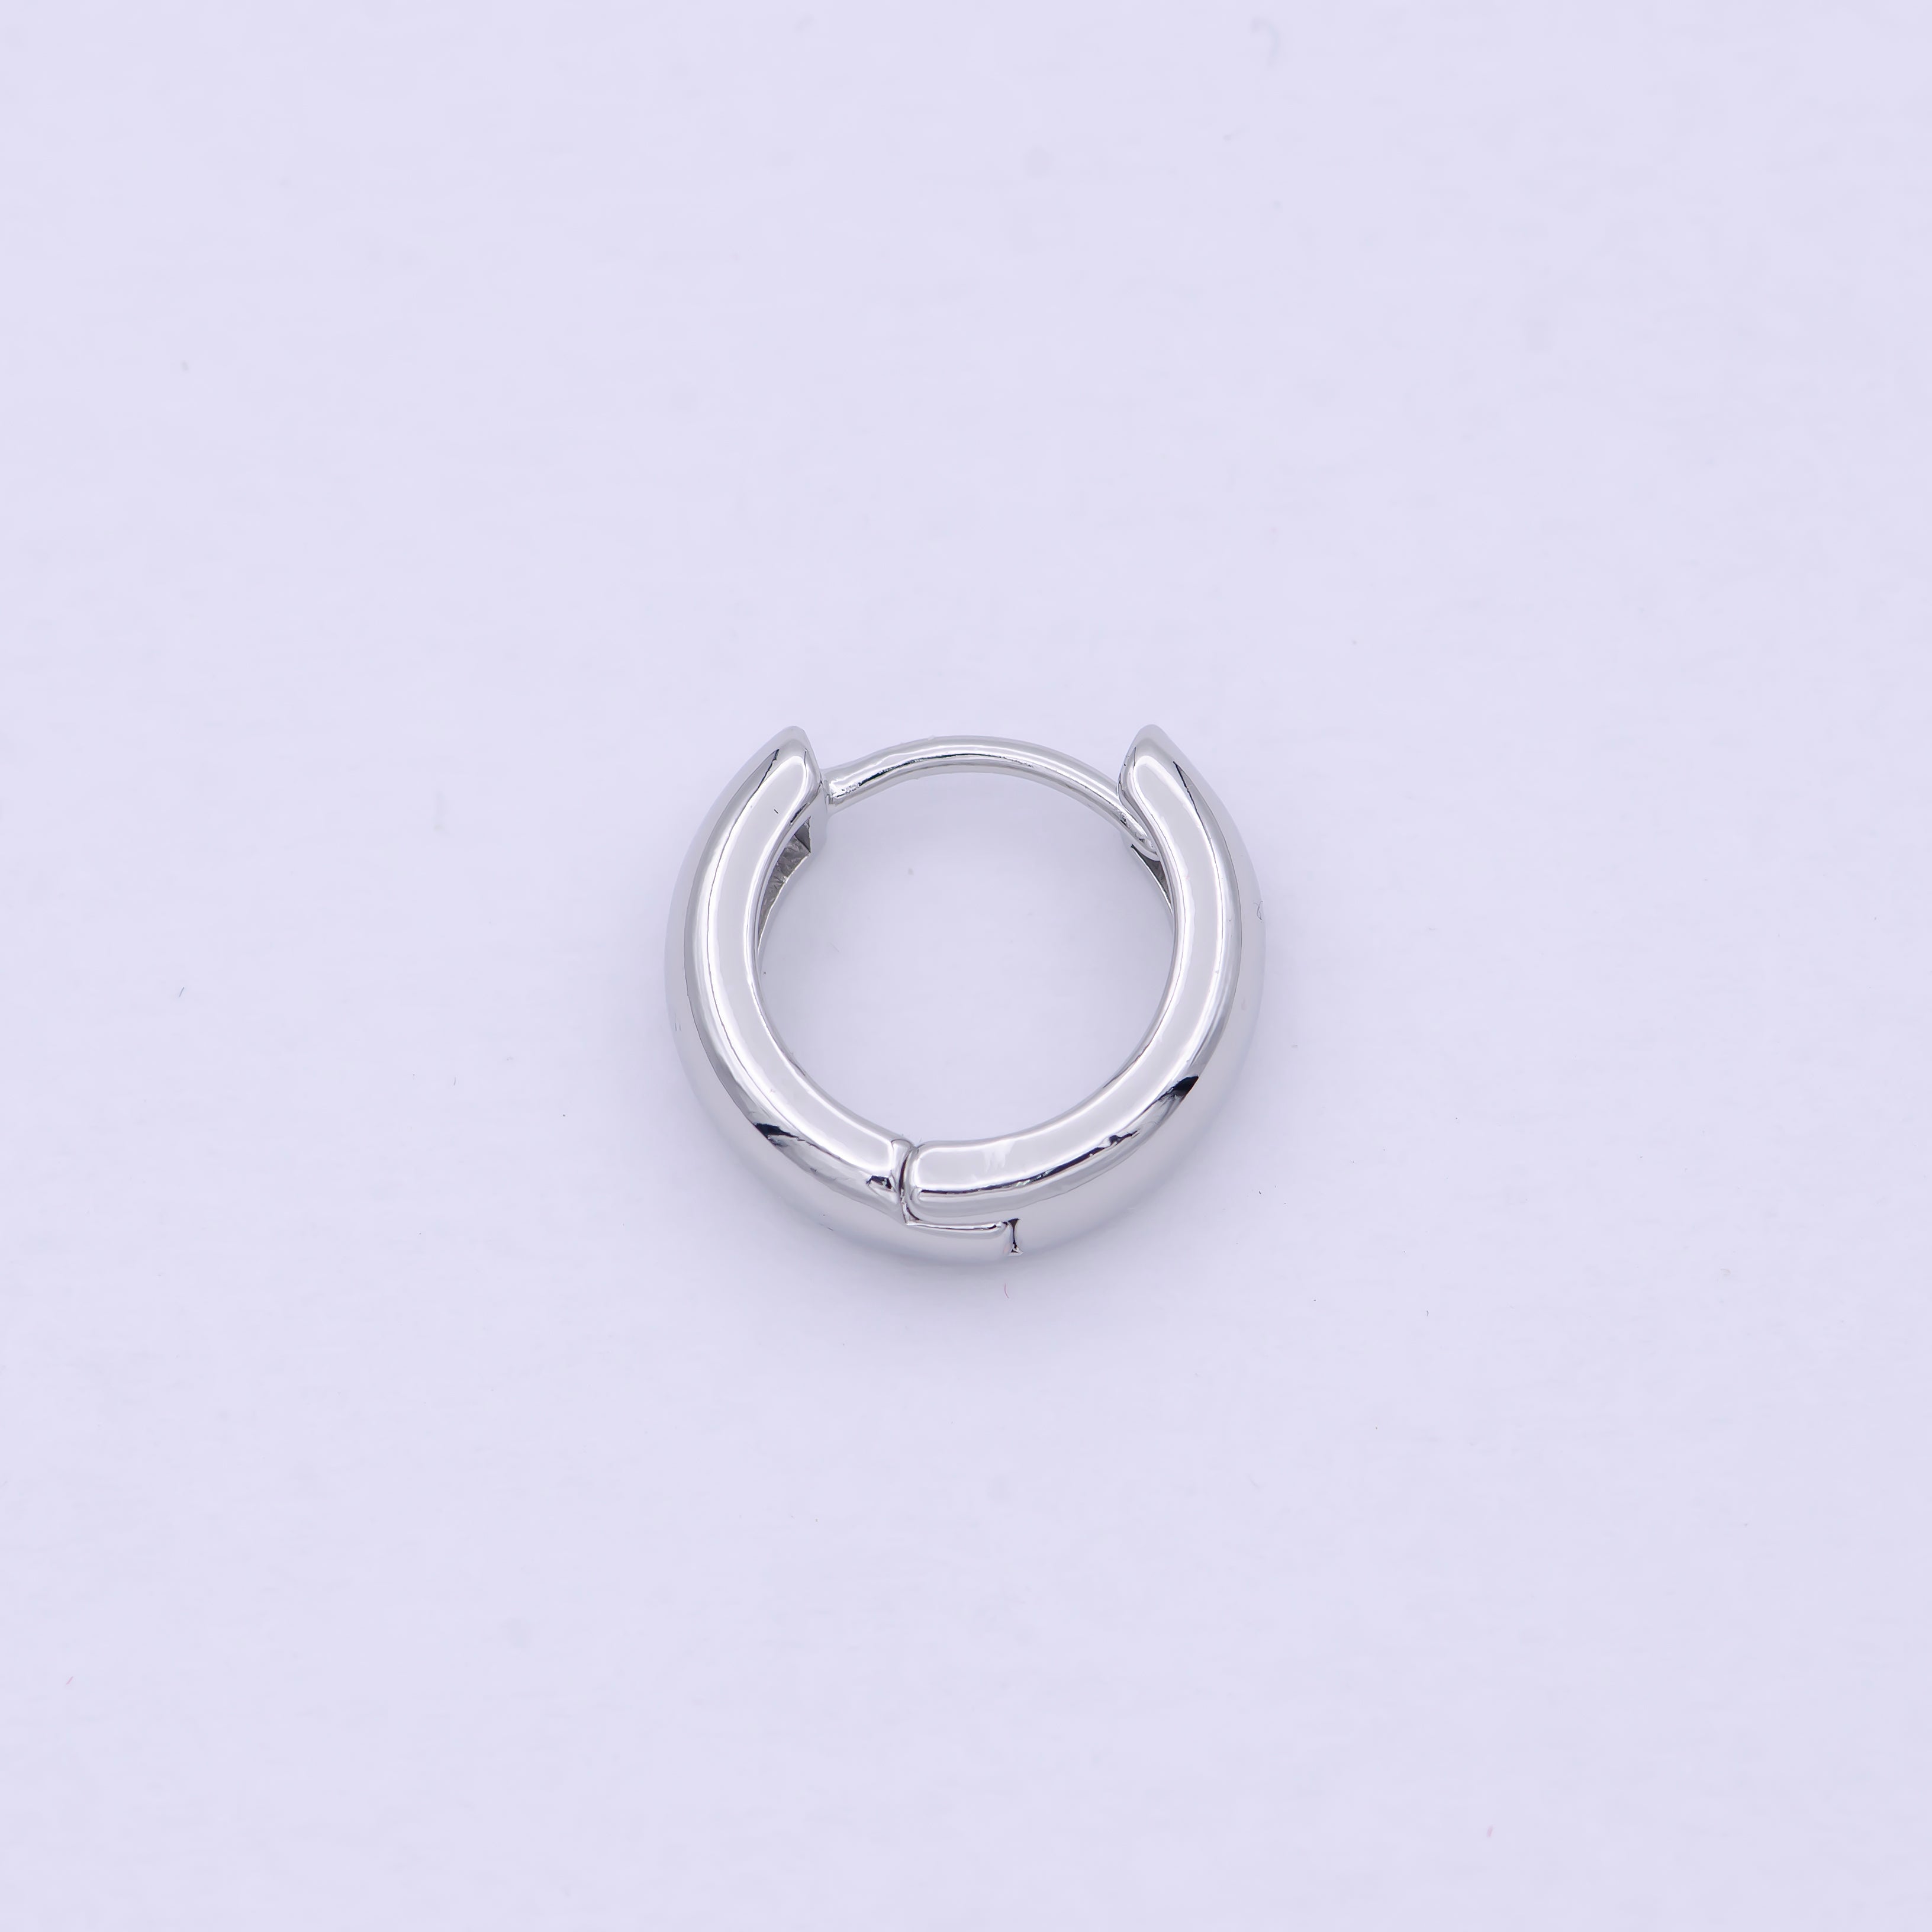 Tiny Silver Rounded Huggie Hoop Earrings, Small Hoop Earring, Cartilage Hoop, Huggie Tragus Conch Hoop p-248 - DLUXCA